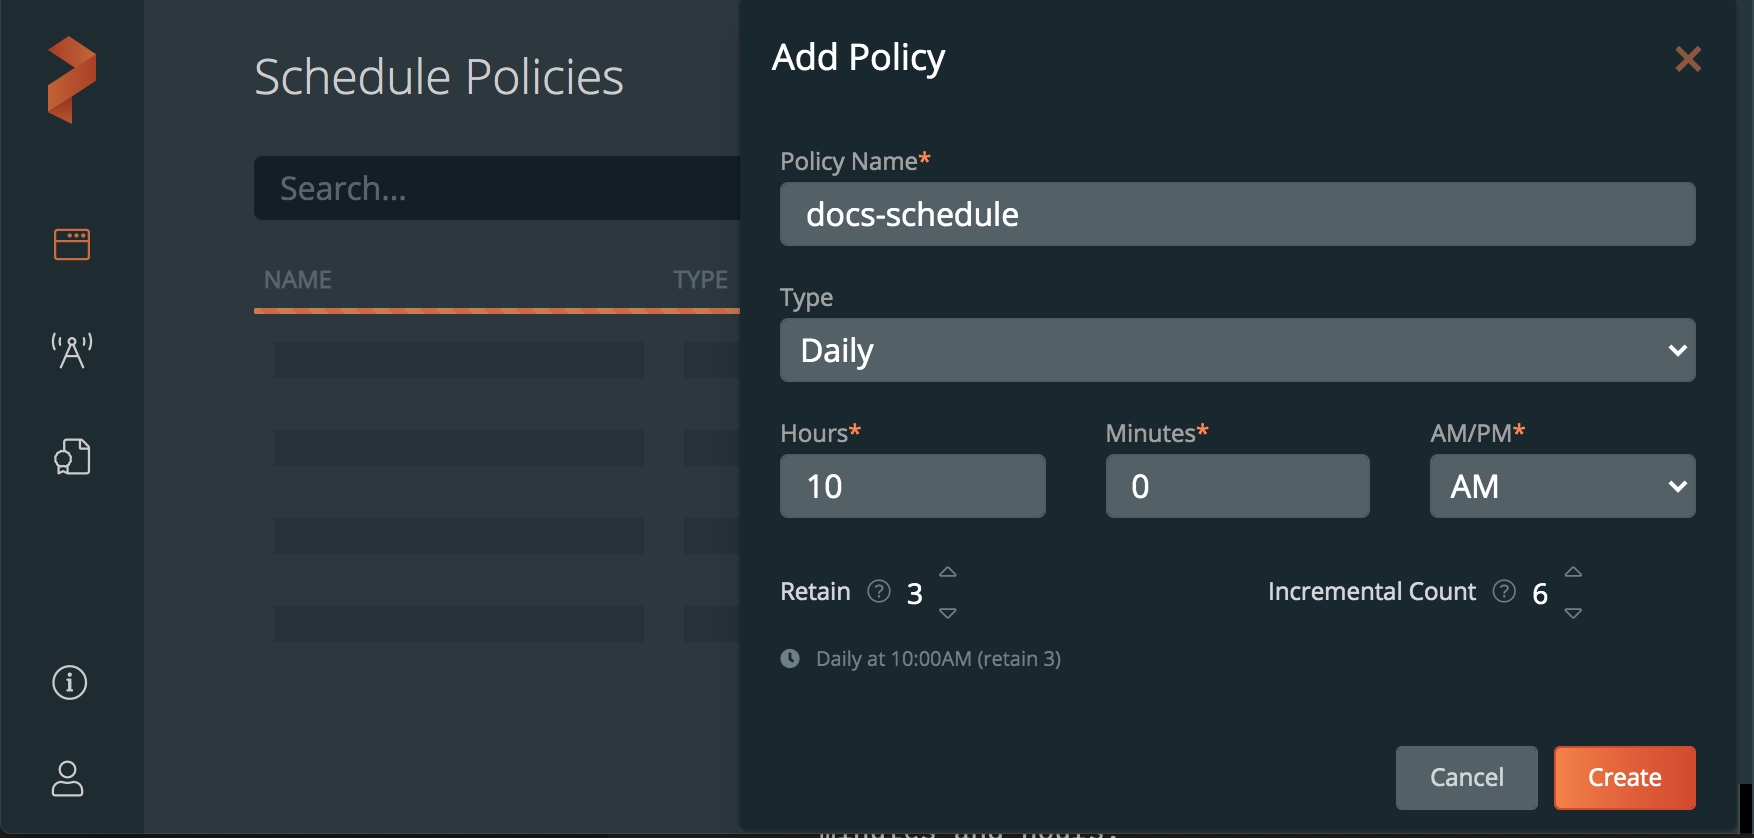 Add schedule policy dialogue